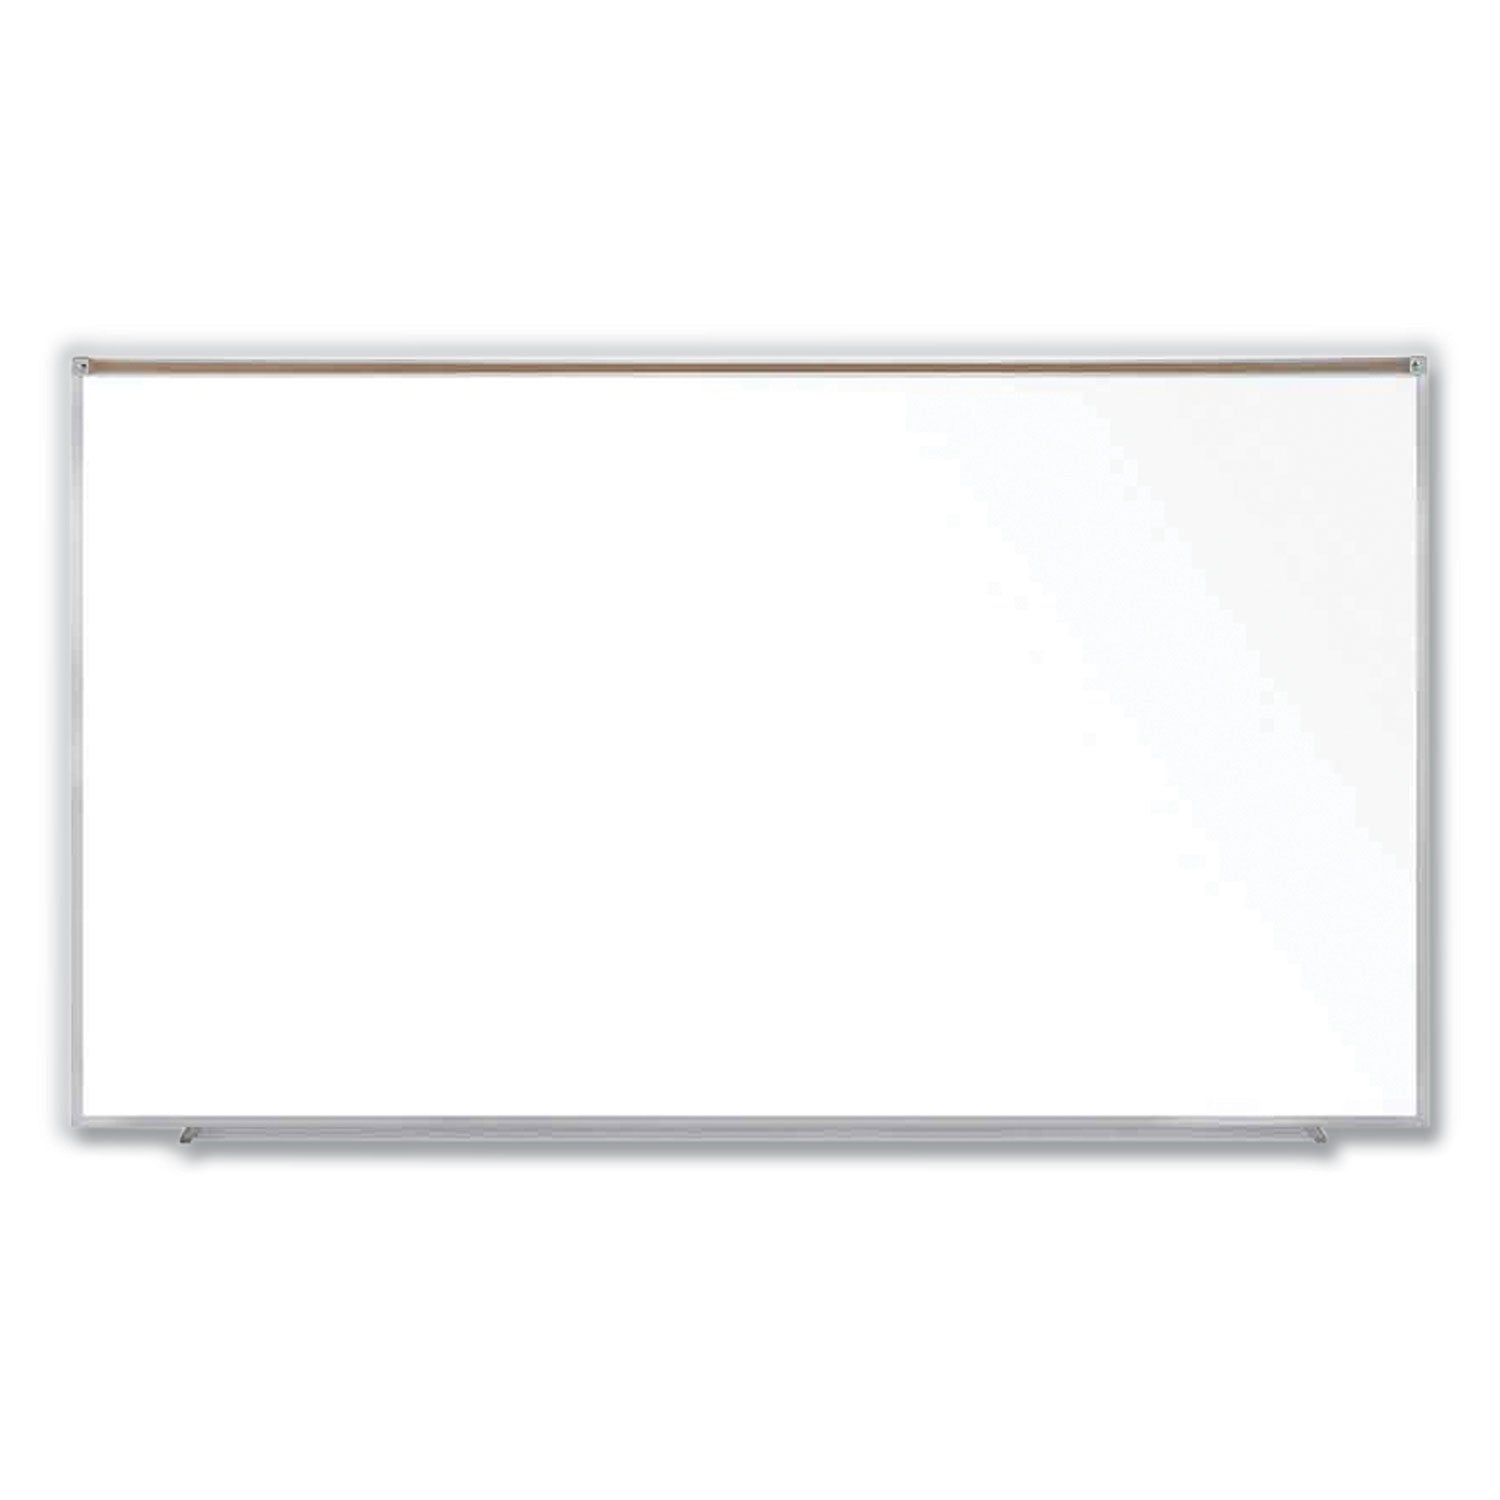 magnetic-porcelain-whiteboard-with-satin-aluminum-frame-and-map-rail-9653-x-6047-white-surface-ships-in-7-10-bus-days_ghem1p581m - 1